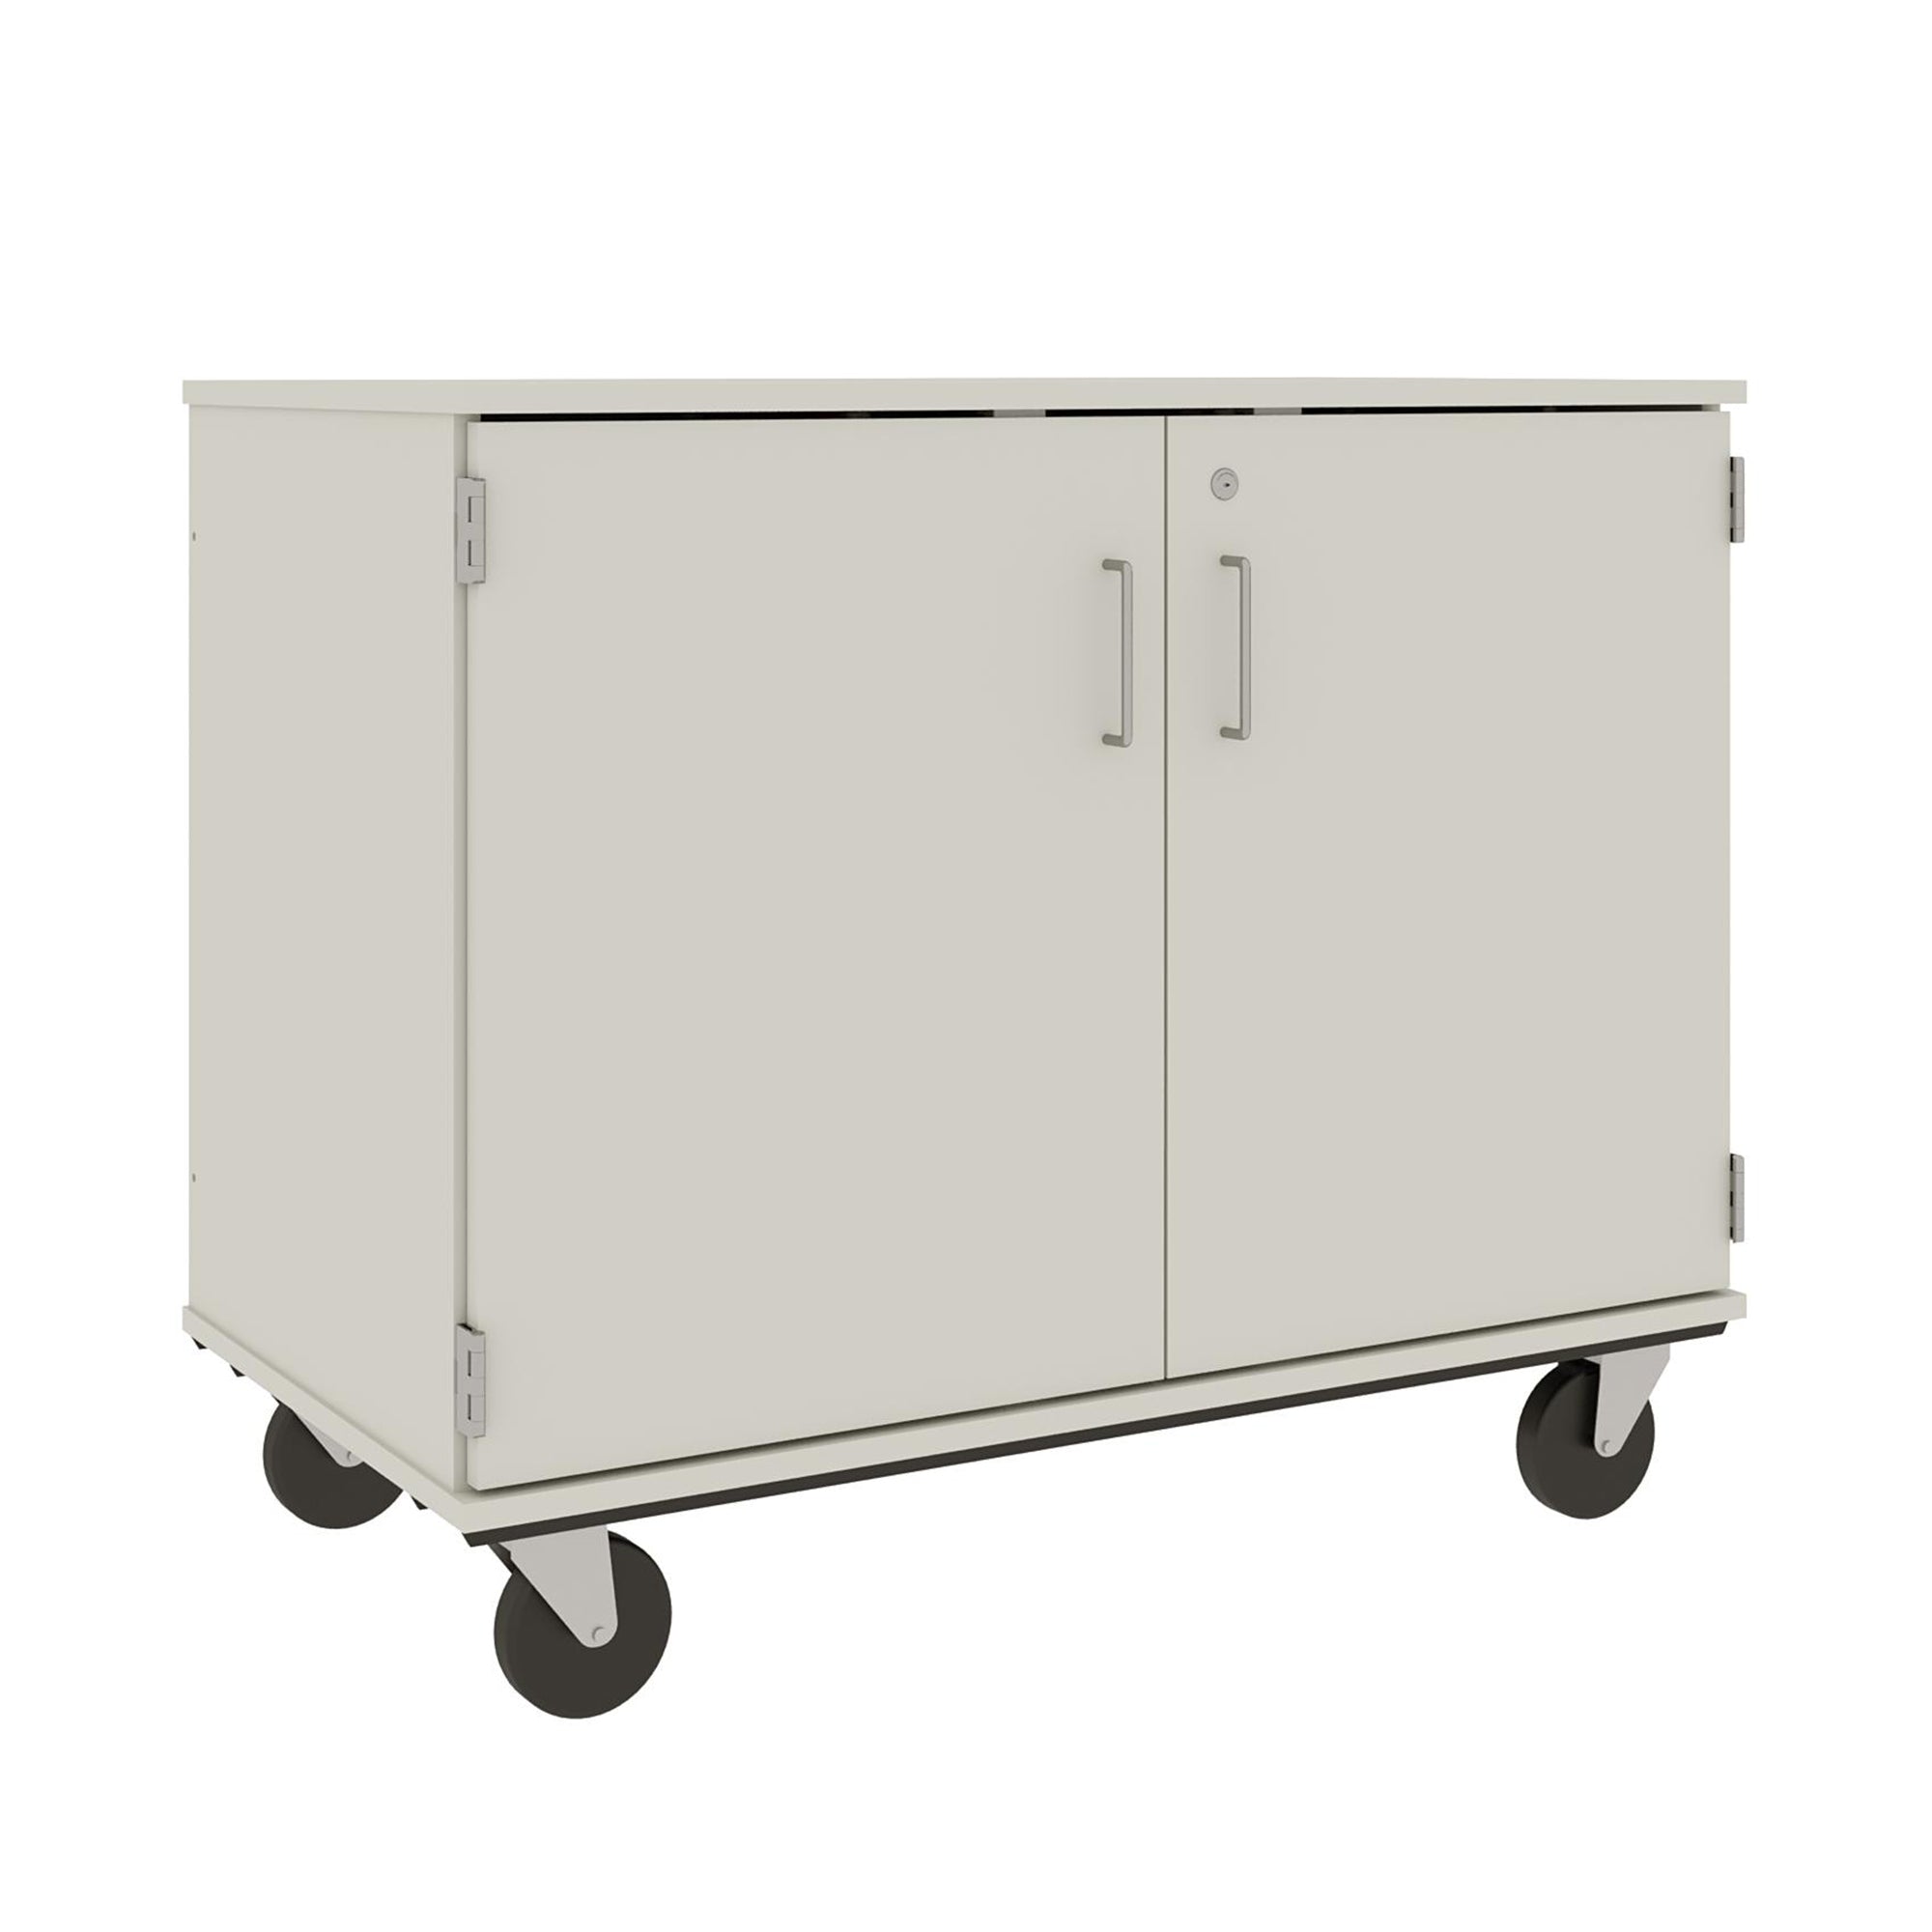 36" Assembled Mobile Bin Storage Cabinet with Doors and 9 6" Bins - 80249 F36